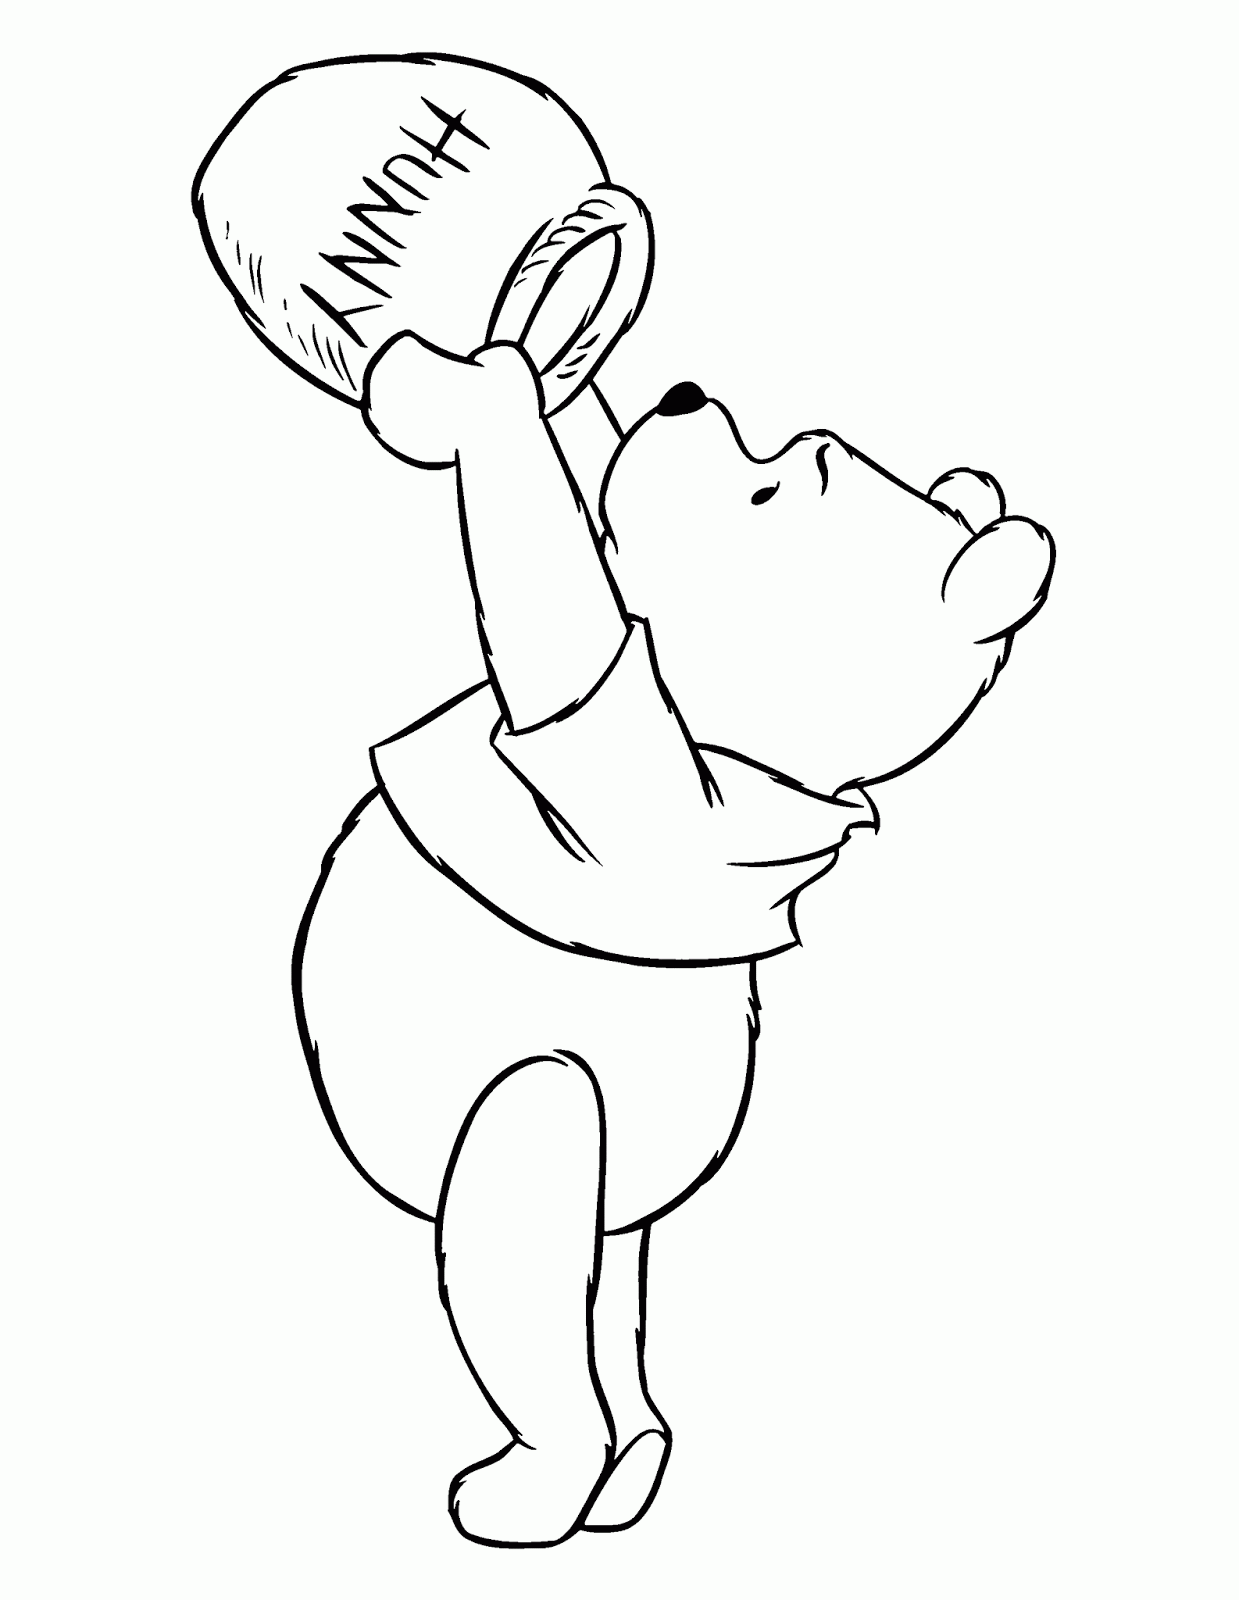 coloring-pages-winnie-the-pooh-and-friends-free-printable-coloring-pages